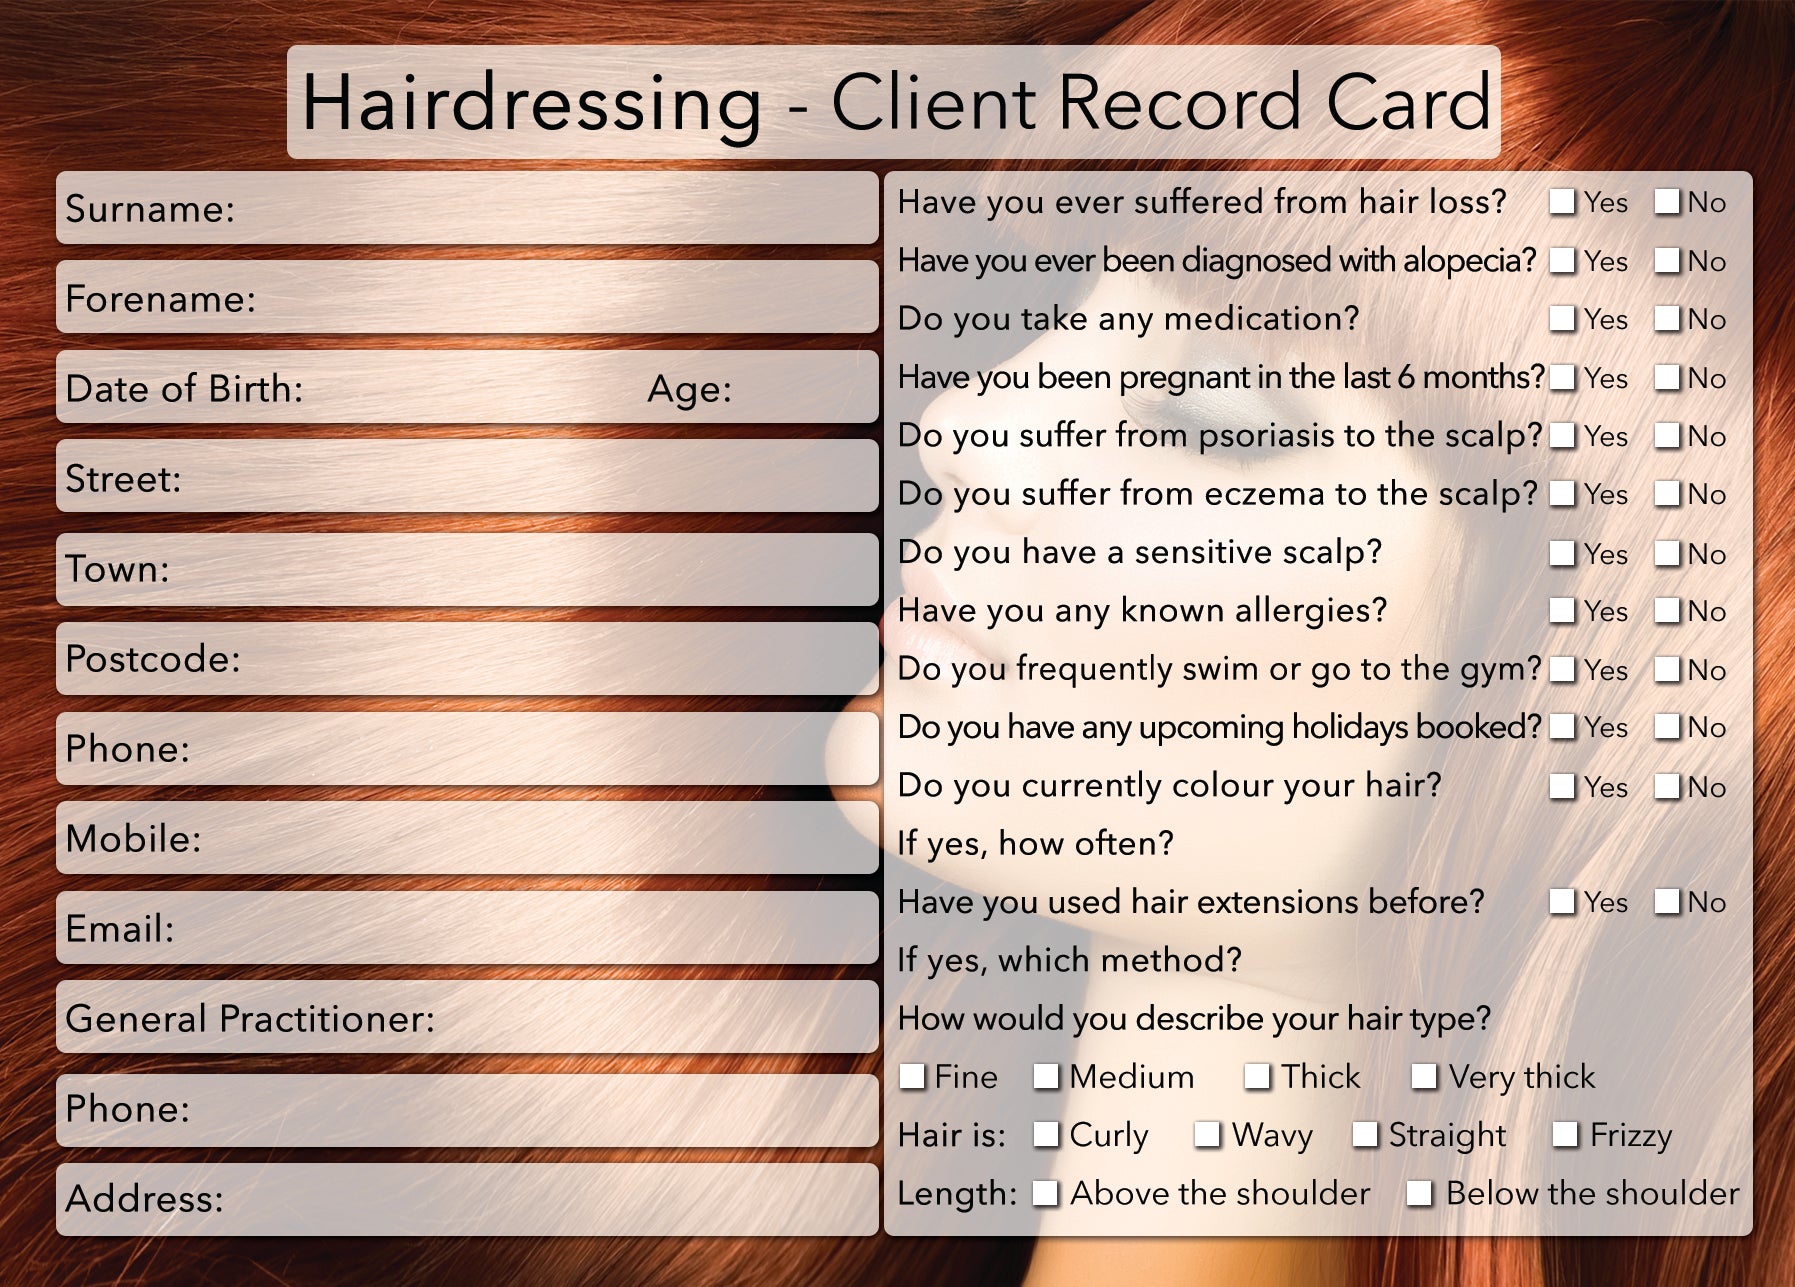 new-hairdressing-client-card-treatment-consultation-card-free-nude